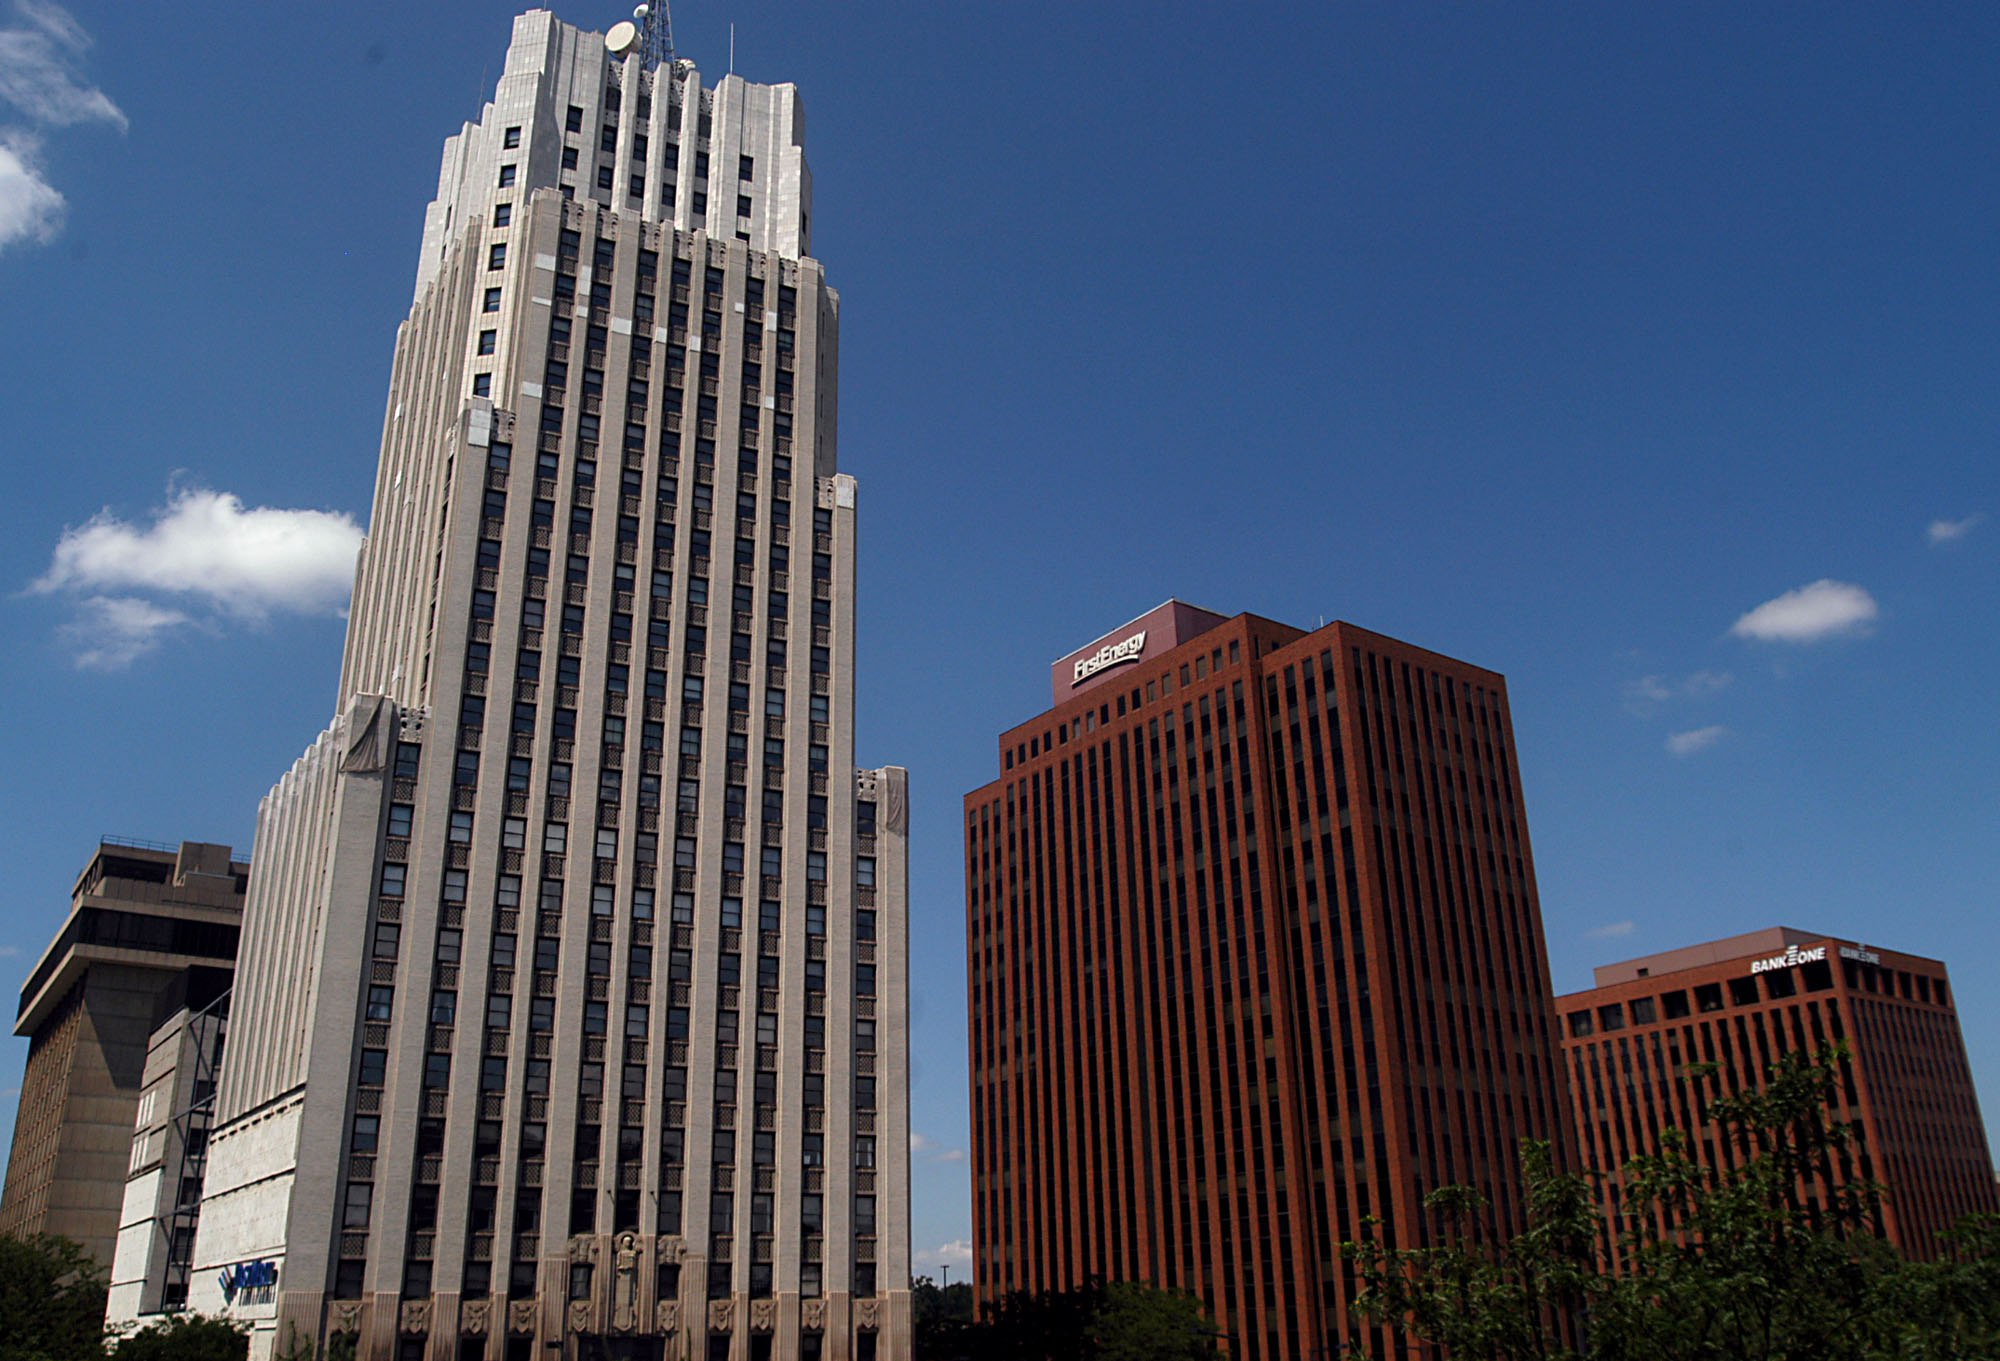 The headquarters of FirstEnergy in Akron, Ohio.